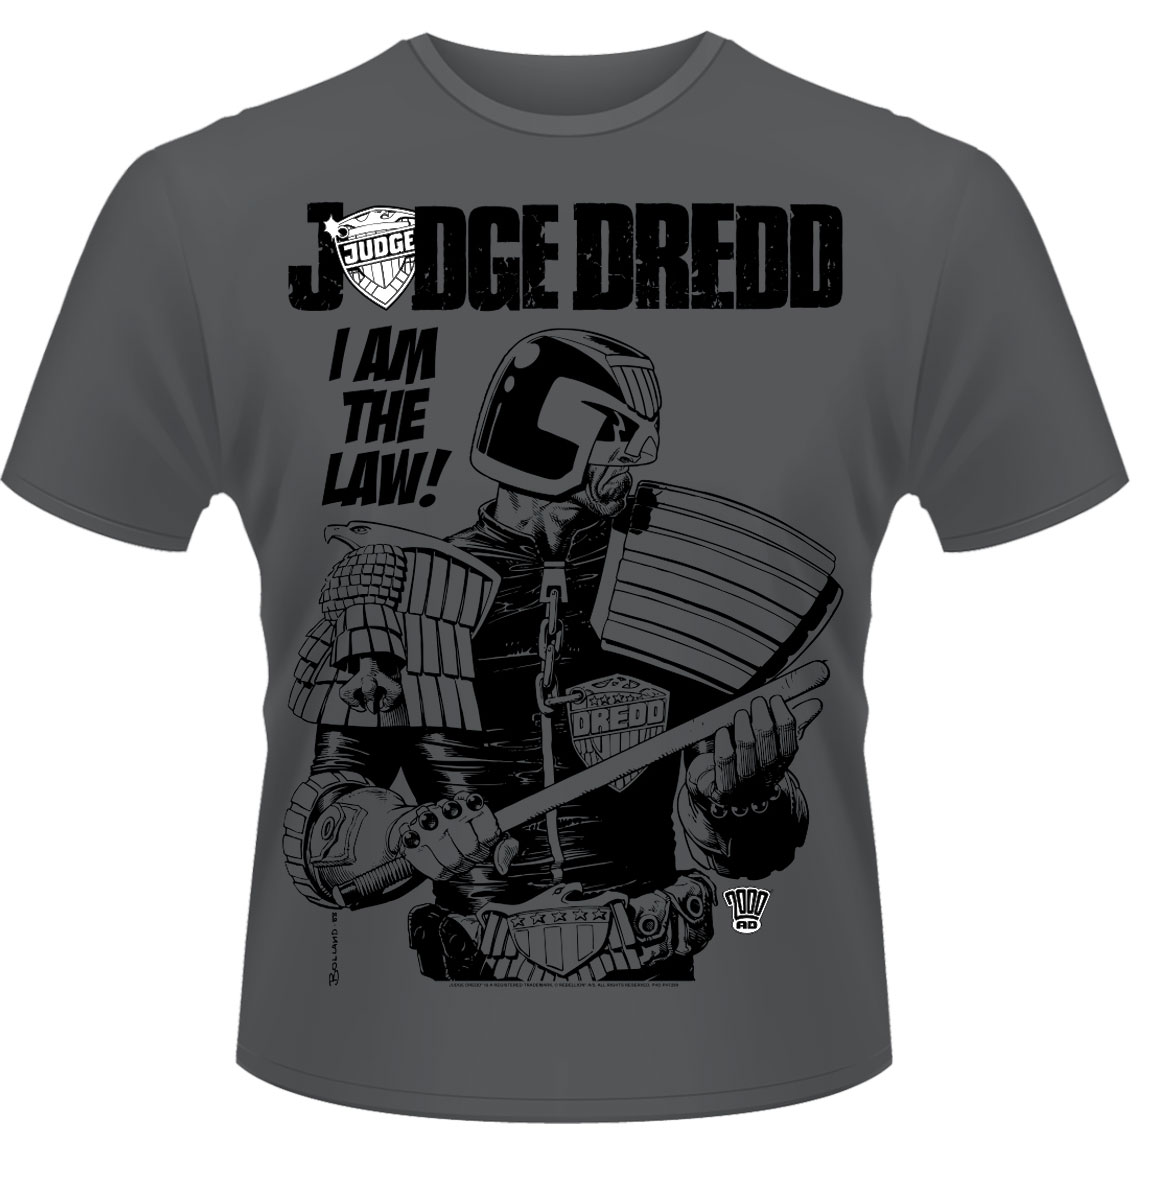 Judge Dredd 'I Am The Law 3' T-Shirt - NEW & OFFICIAL! - Photo 1/1